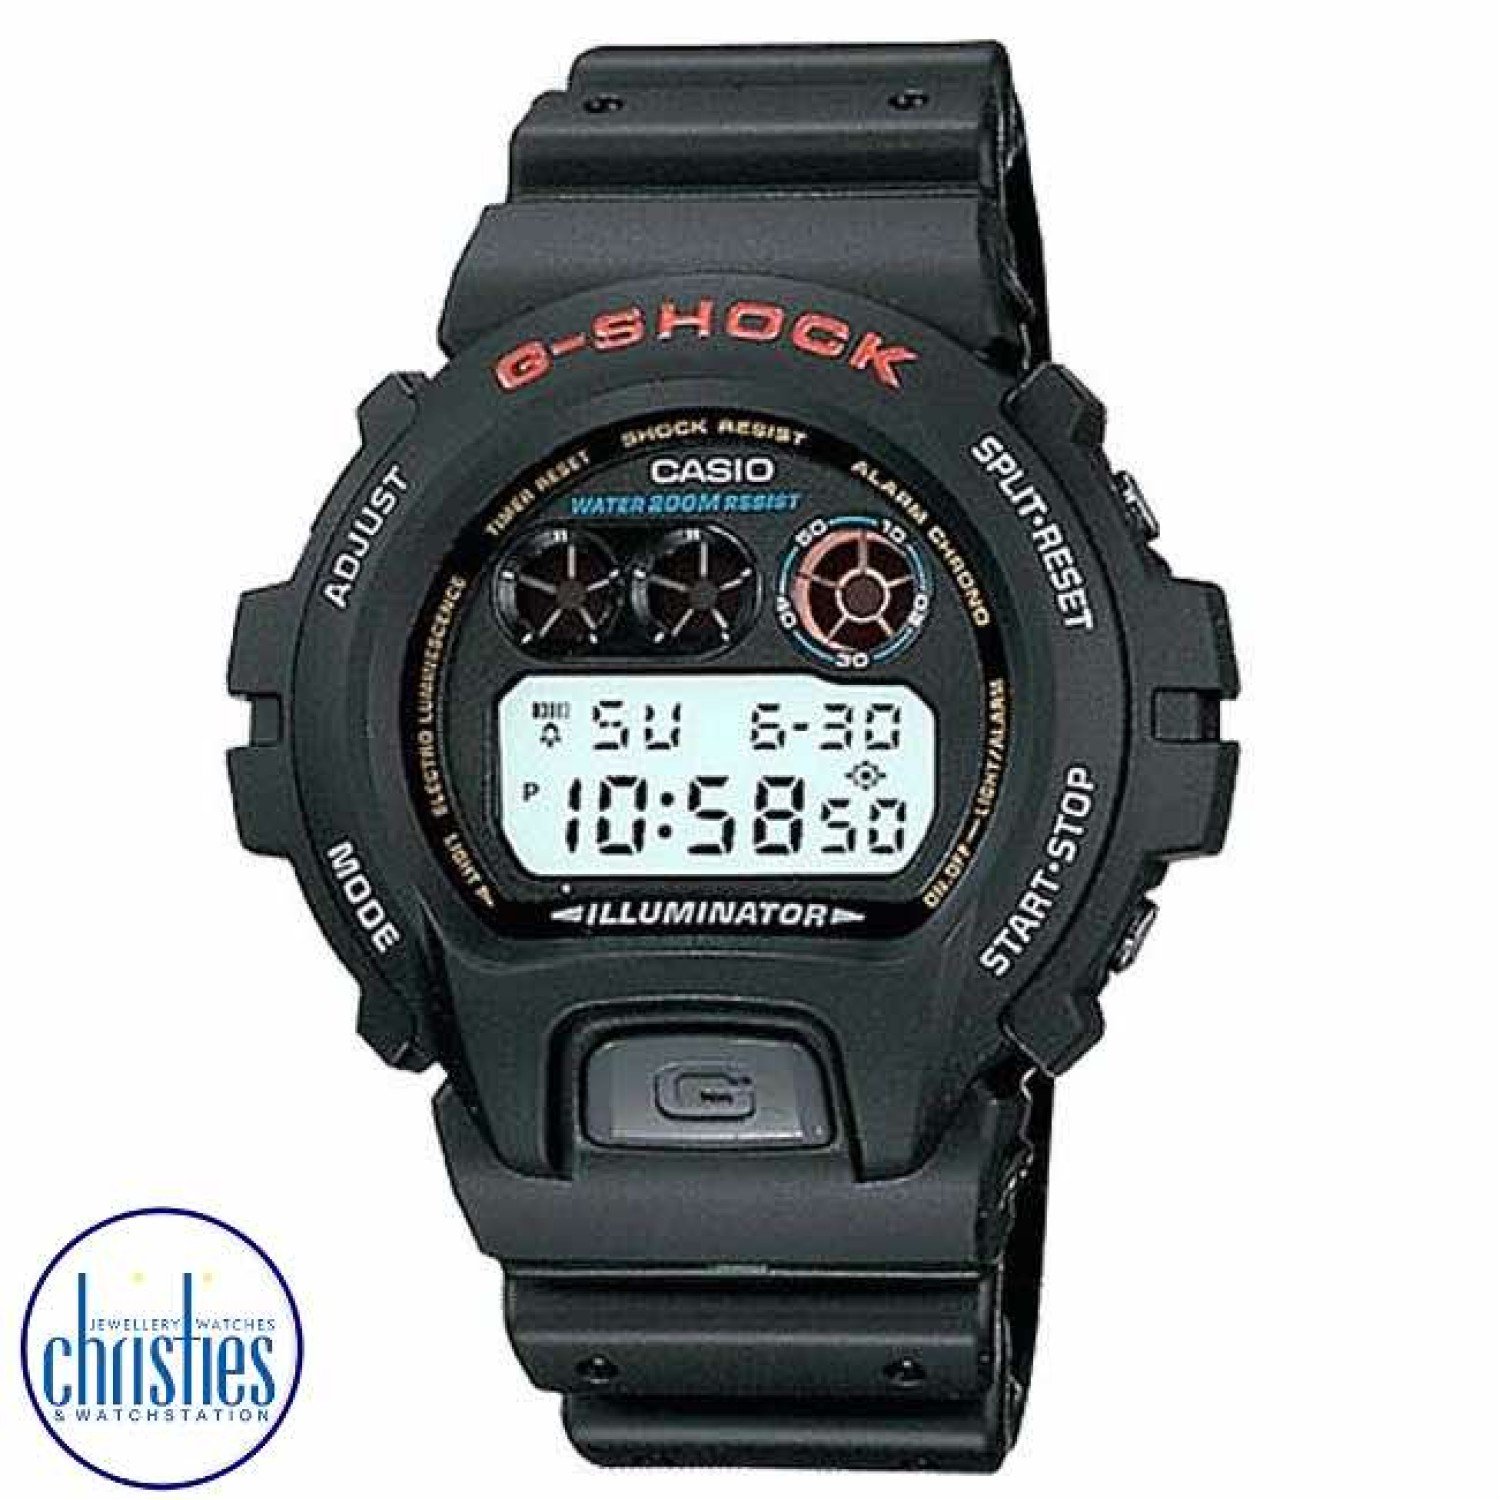 DW6900-1V G-Shock Classic Watch. G-Shock Classic Watch featuring Shock resistance, 200M WR, countdown timer, 1/100 sec. stopwatch and auto-calendar. Black resin band digital watch with neutral face. LAYBUY - Pay it easy, in 6 weekly payments and hav casio